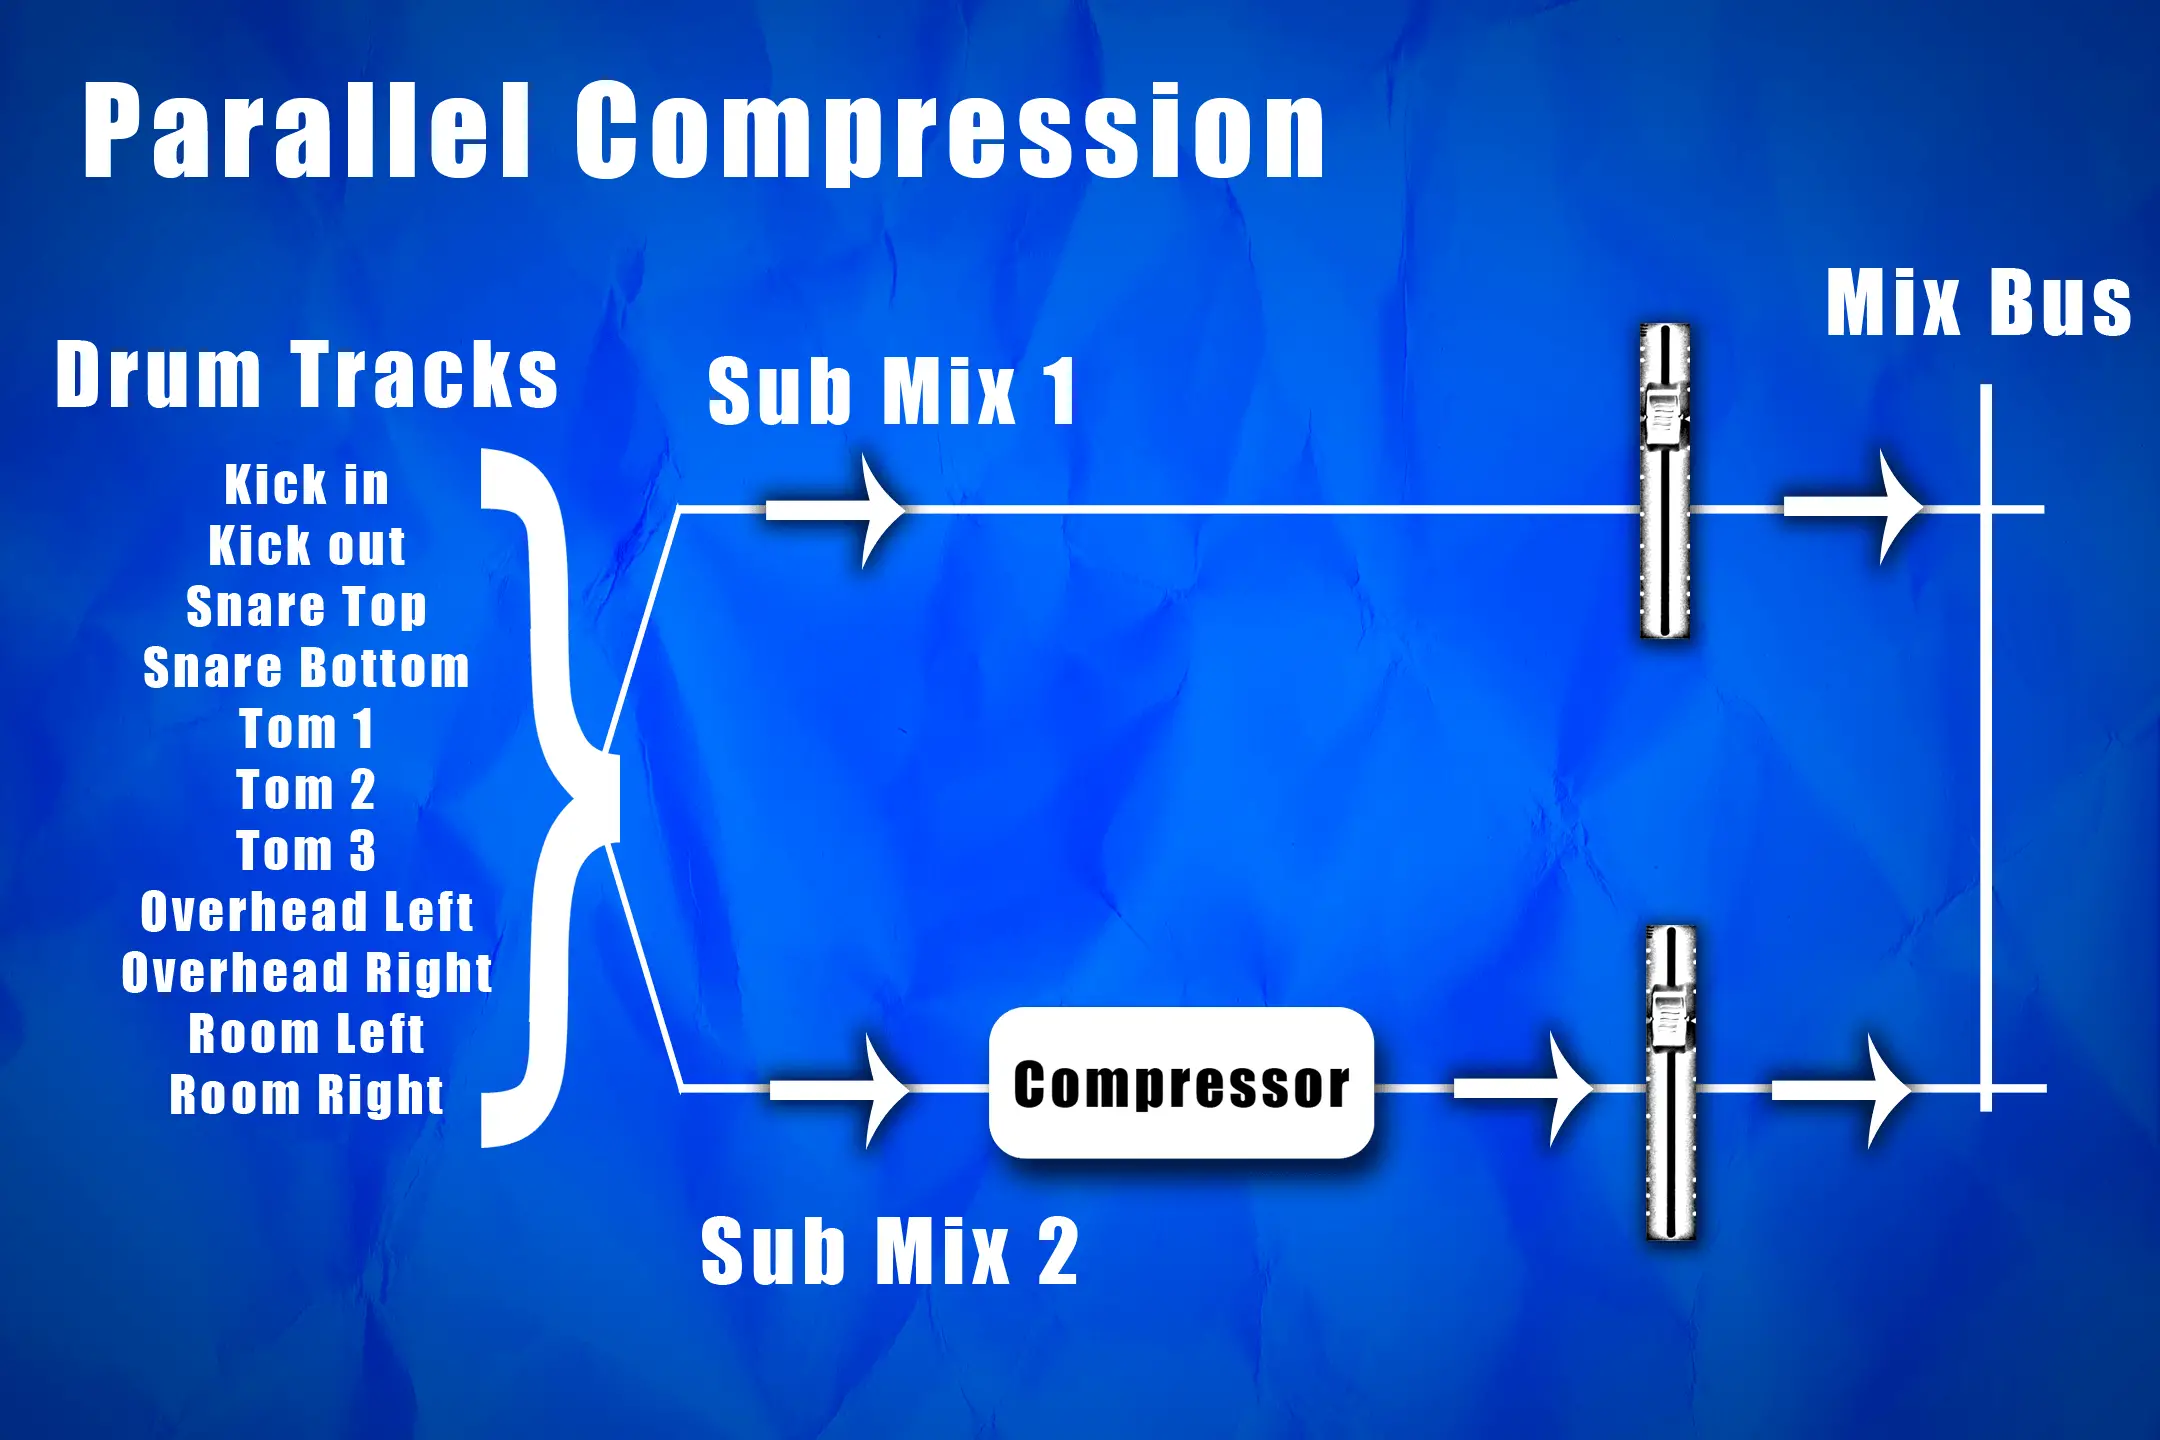 Parallel Compression